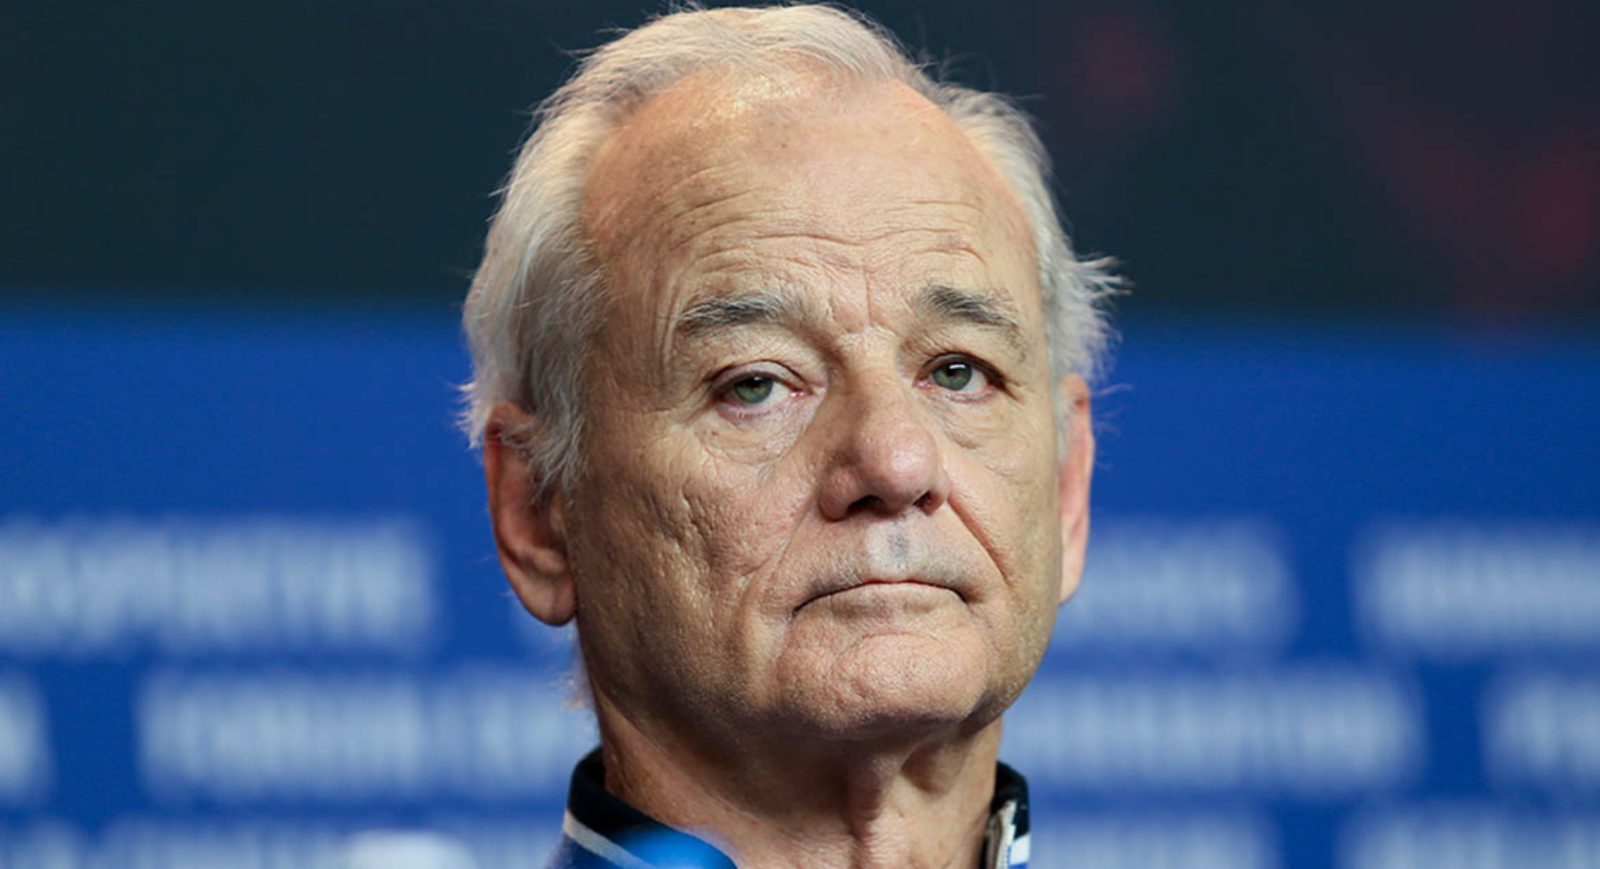 Bill Murray loses charity money to a hacker